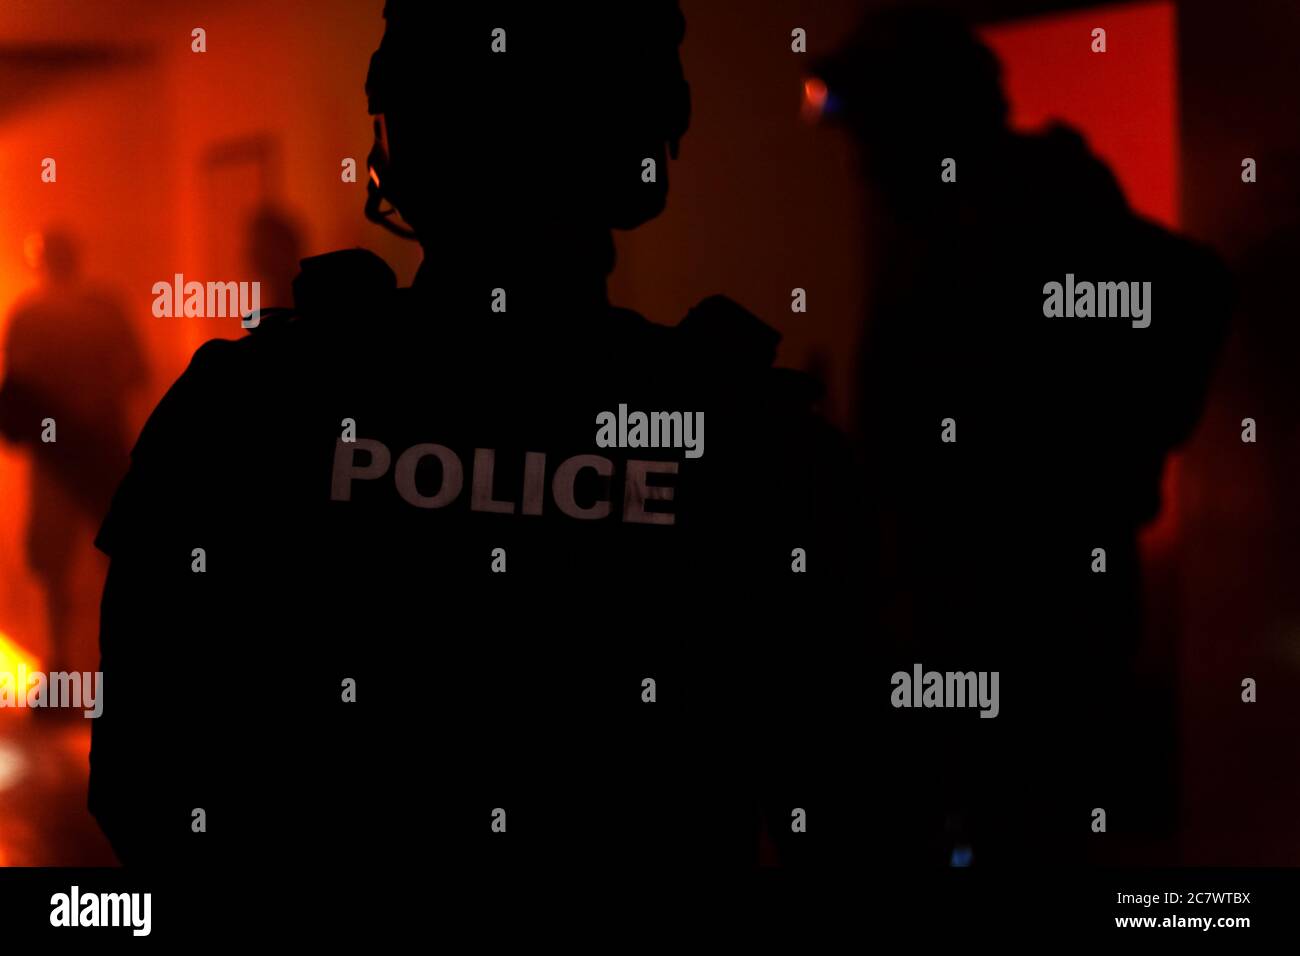 Silhouette of a police officer. Police commando in action, arresting the perpetrator in the building Stock Photo